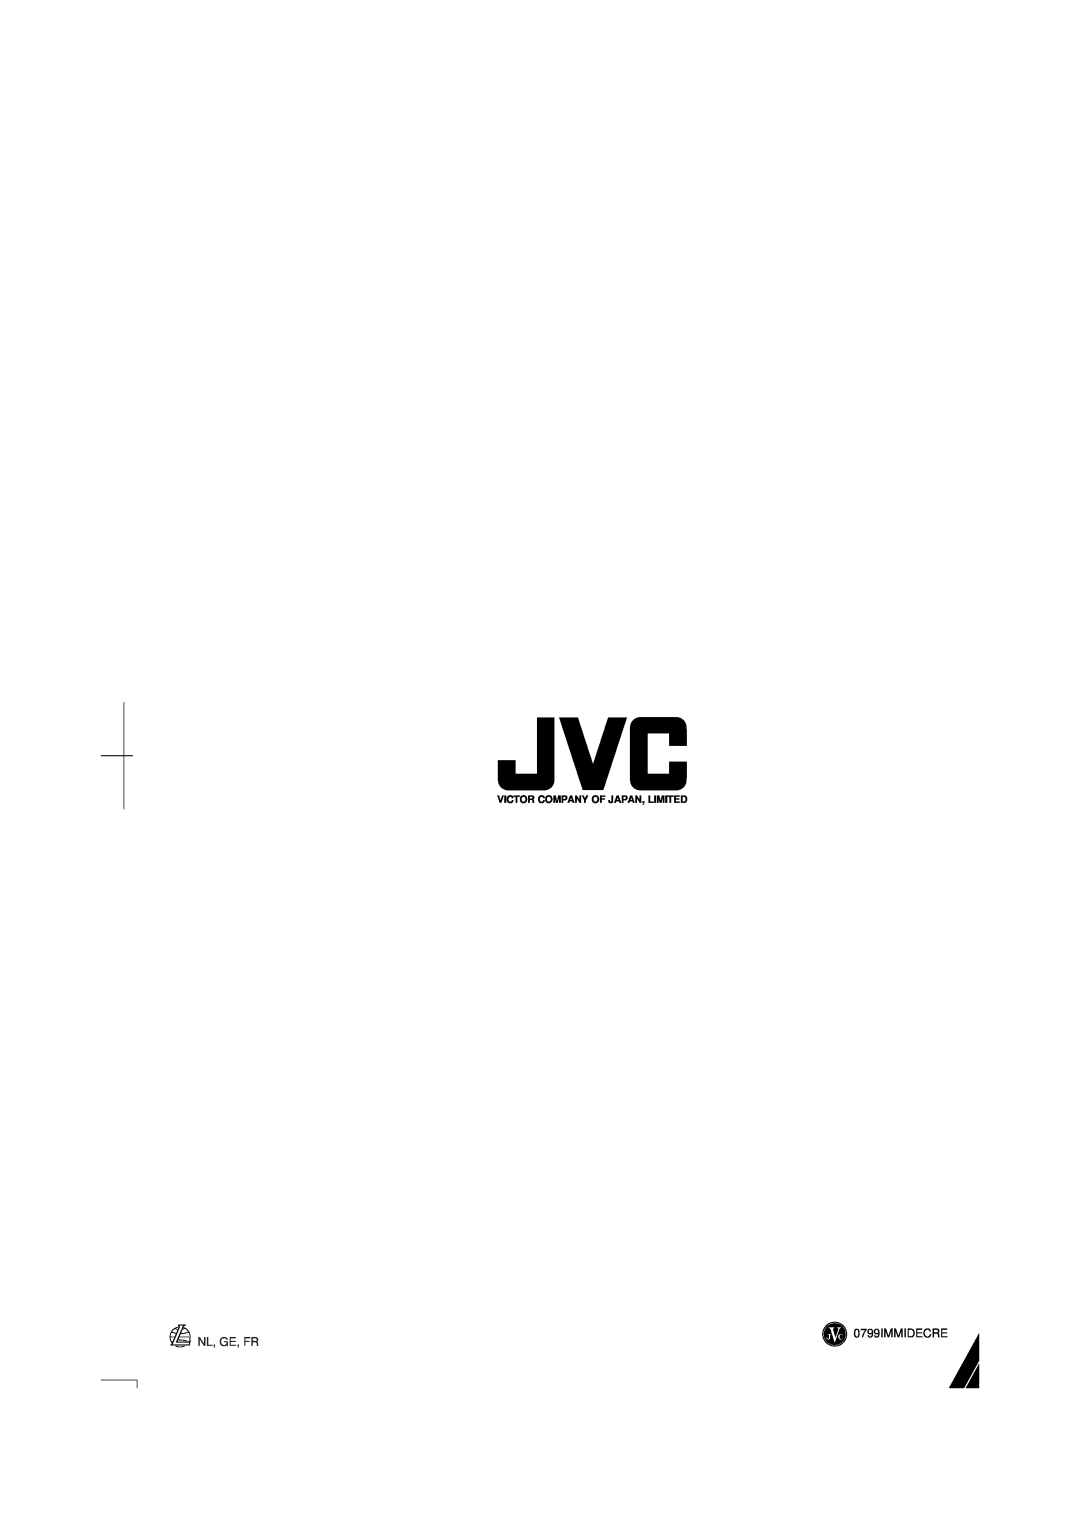 JVC DX-E55 manual 0799IMMIDECRE NL, GE, FR, Victor Company Of Japan, Limited 